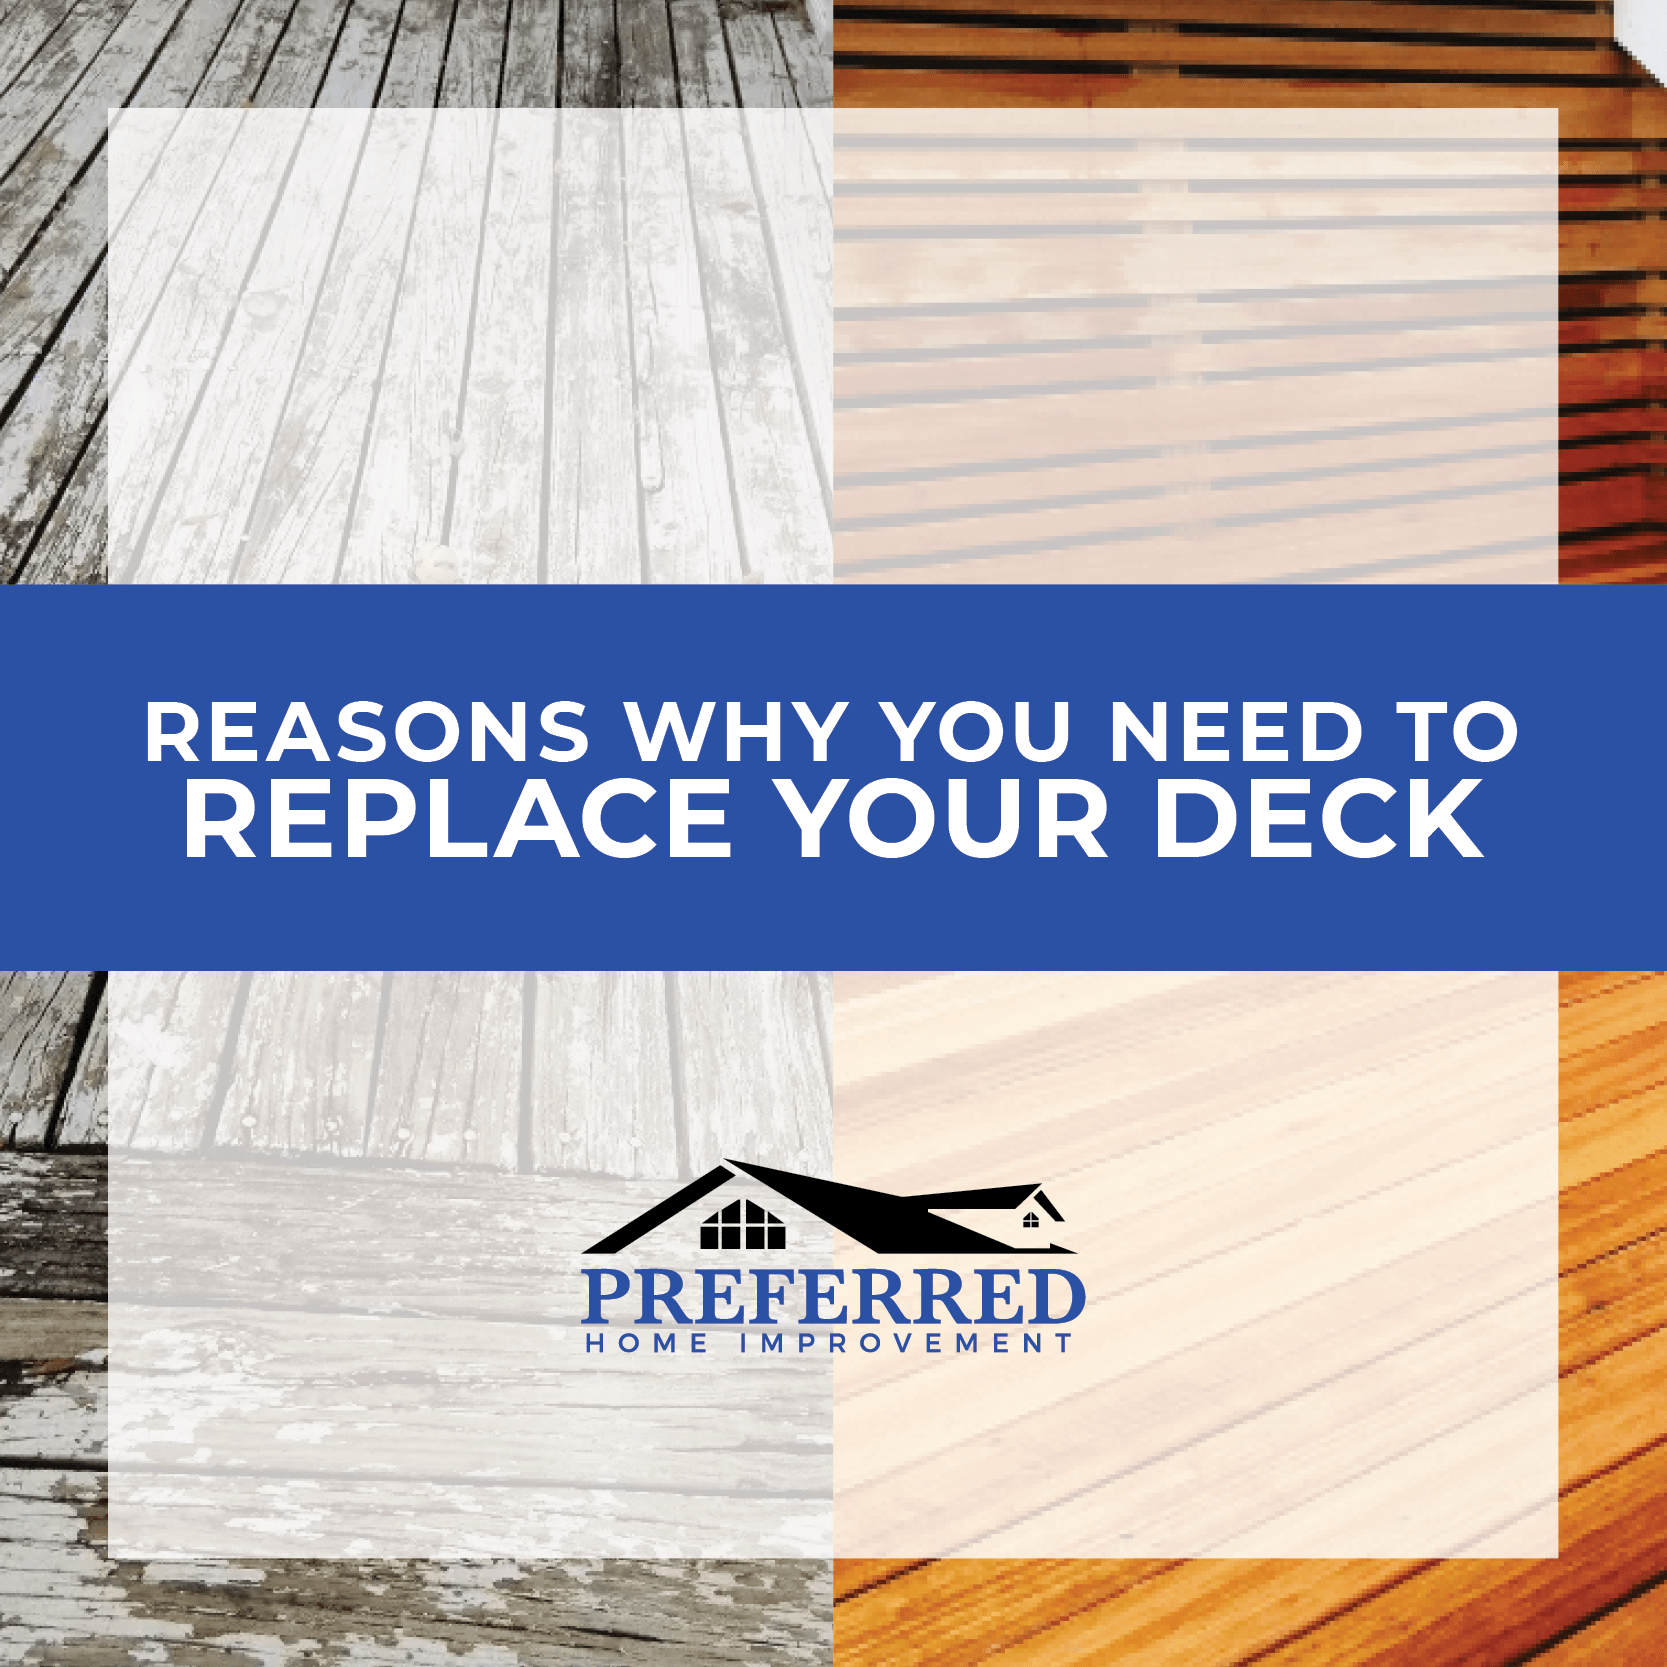 Reasons why you need to replace your deck